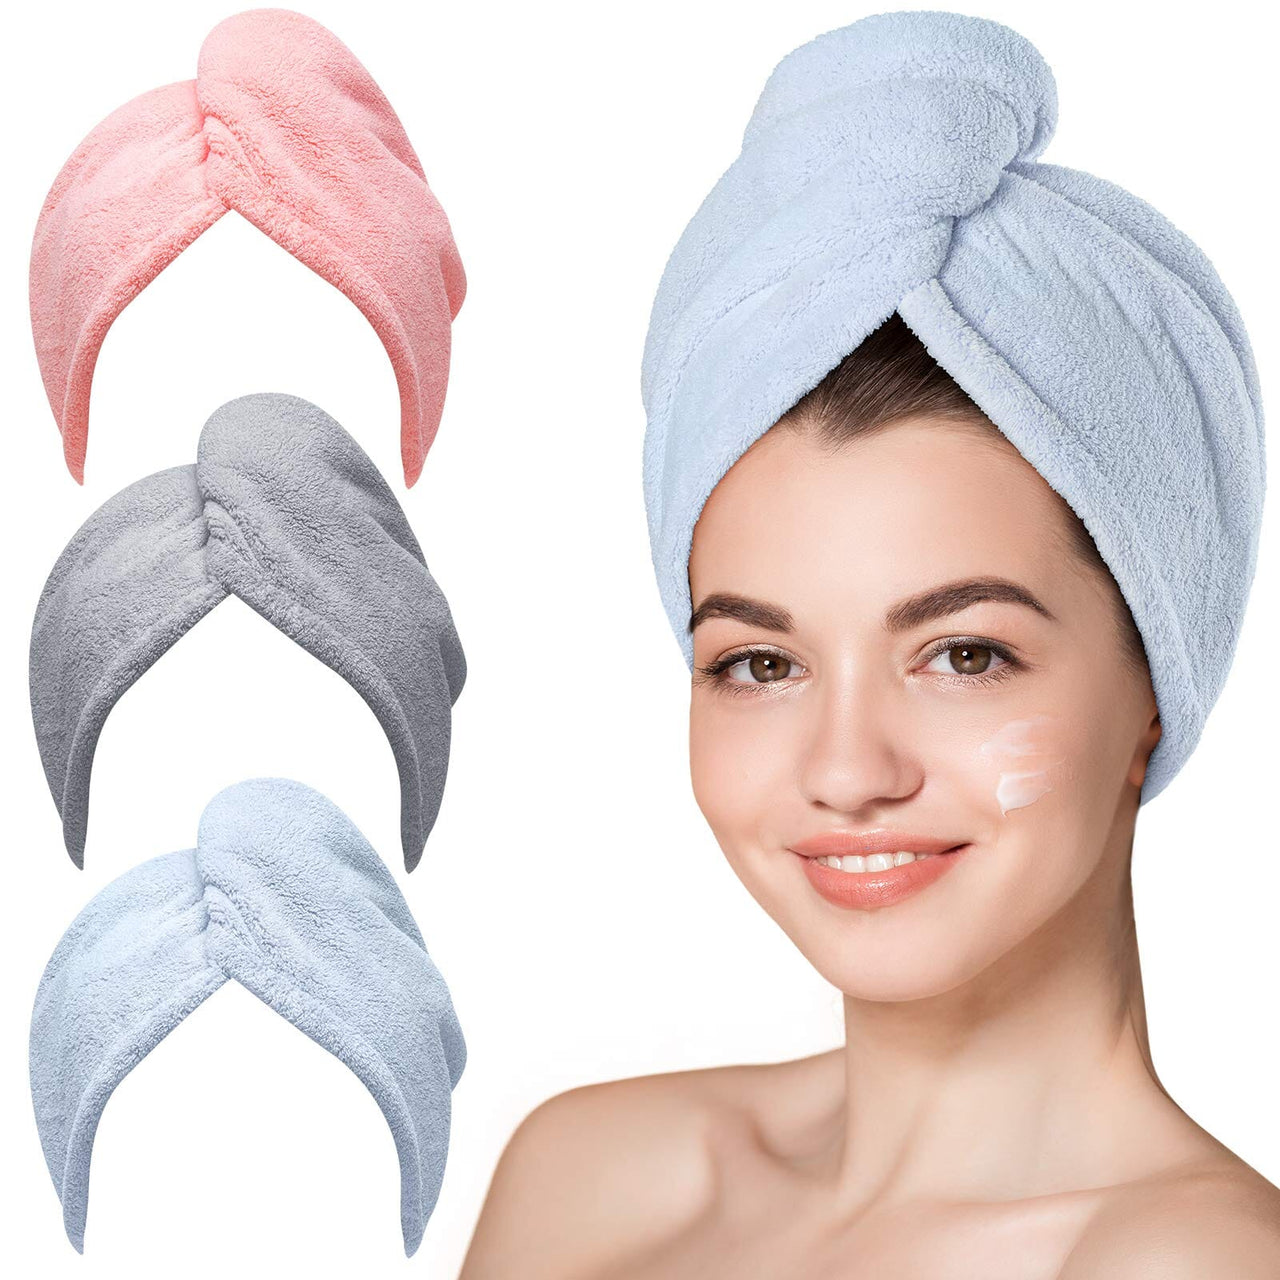 Hicober Hicober Microfiber Hair Towel, 3 Packs Hair Turbans for Wet Hair, Drying Hair Wrap Towels for Curly Hair Women Anti Frizz (Blue,Grey,Pink)